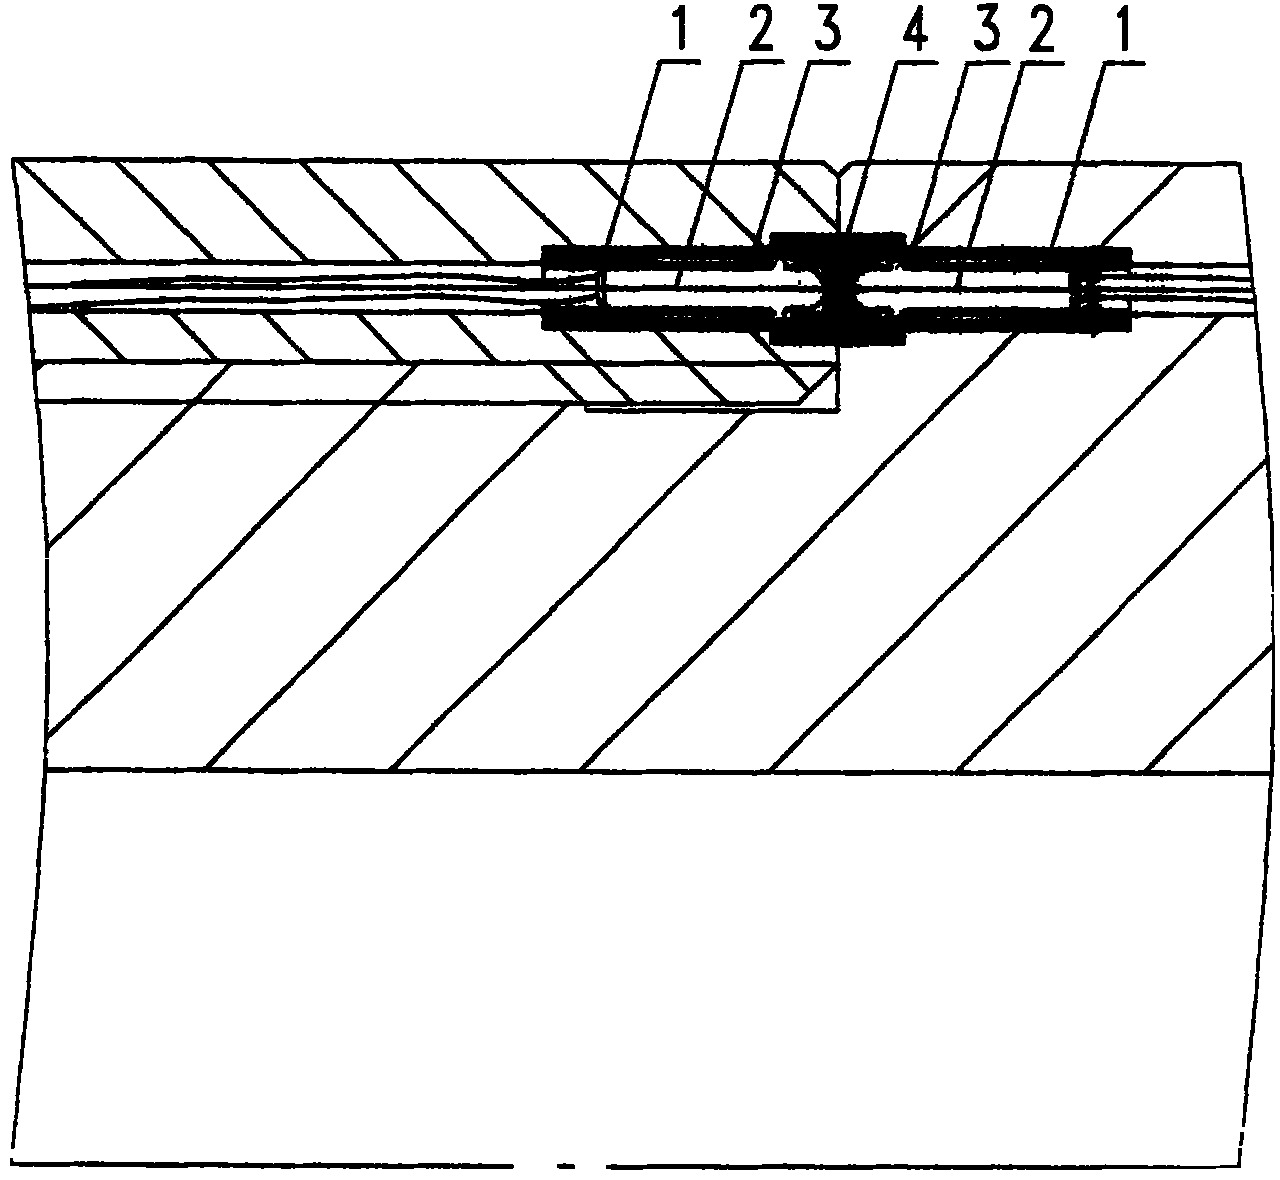 Apparatus for realizing joint signal transmission